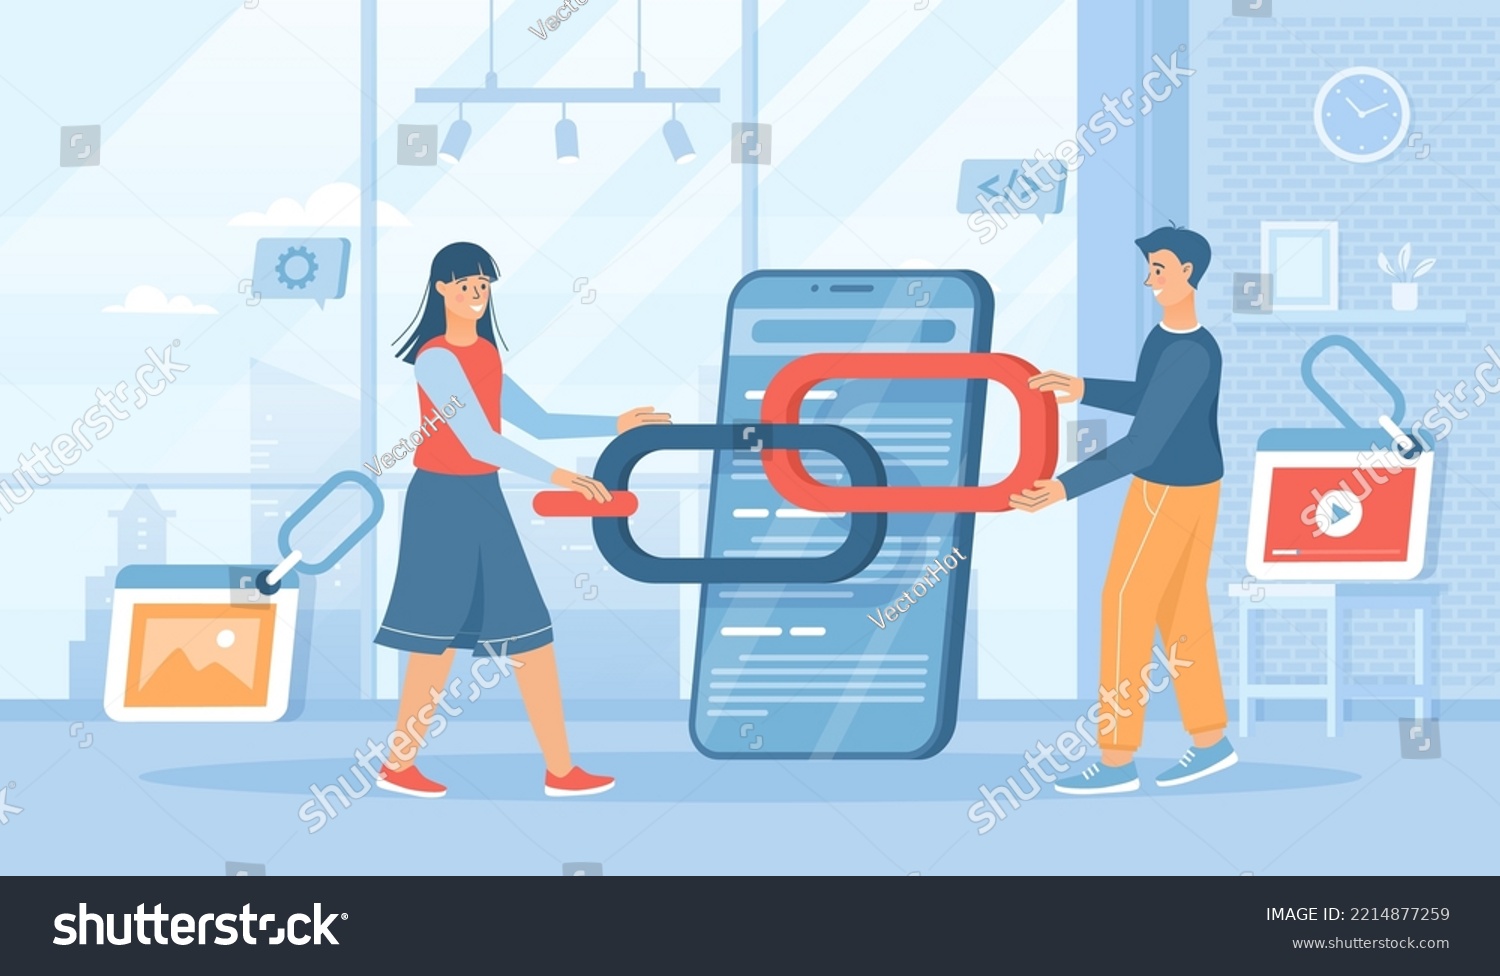 SVG of Link building between website pages. Search engine optimization concept, SEO. People holding chain on bowser window. Flat cartoon vector illustration with people characters for banner, website svg